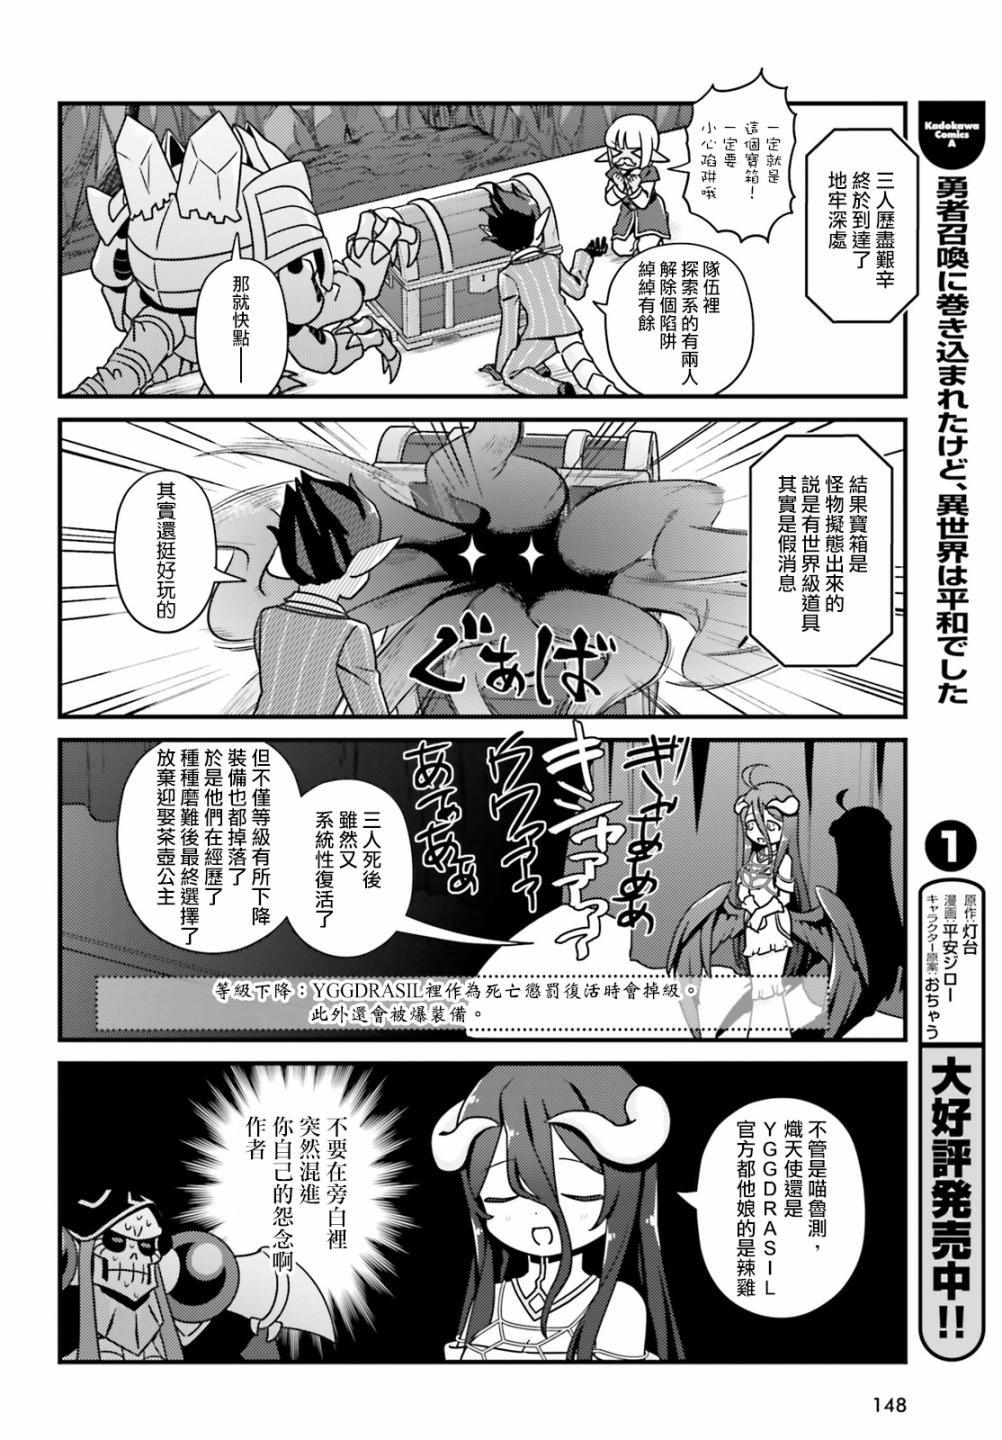 Overlord不死者之OH！ - 29話 - 2